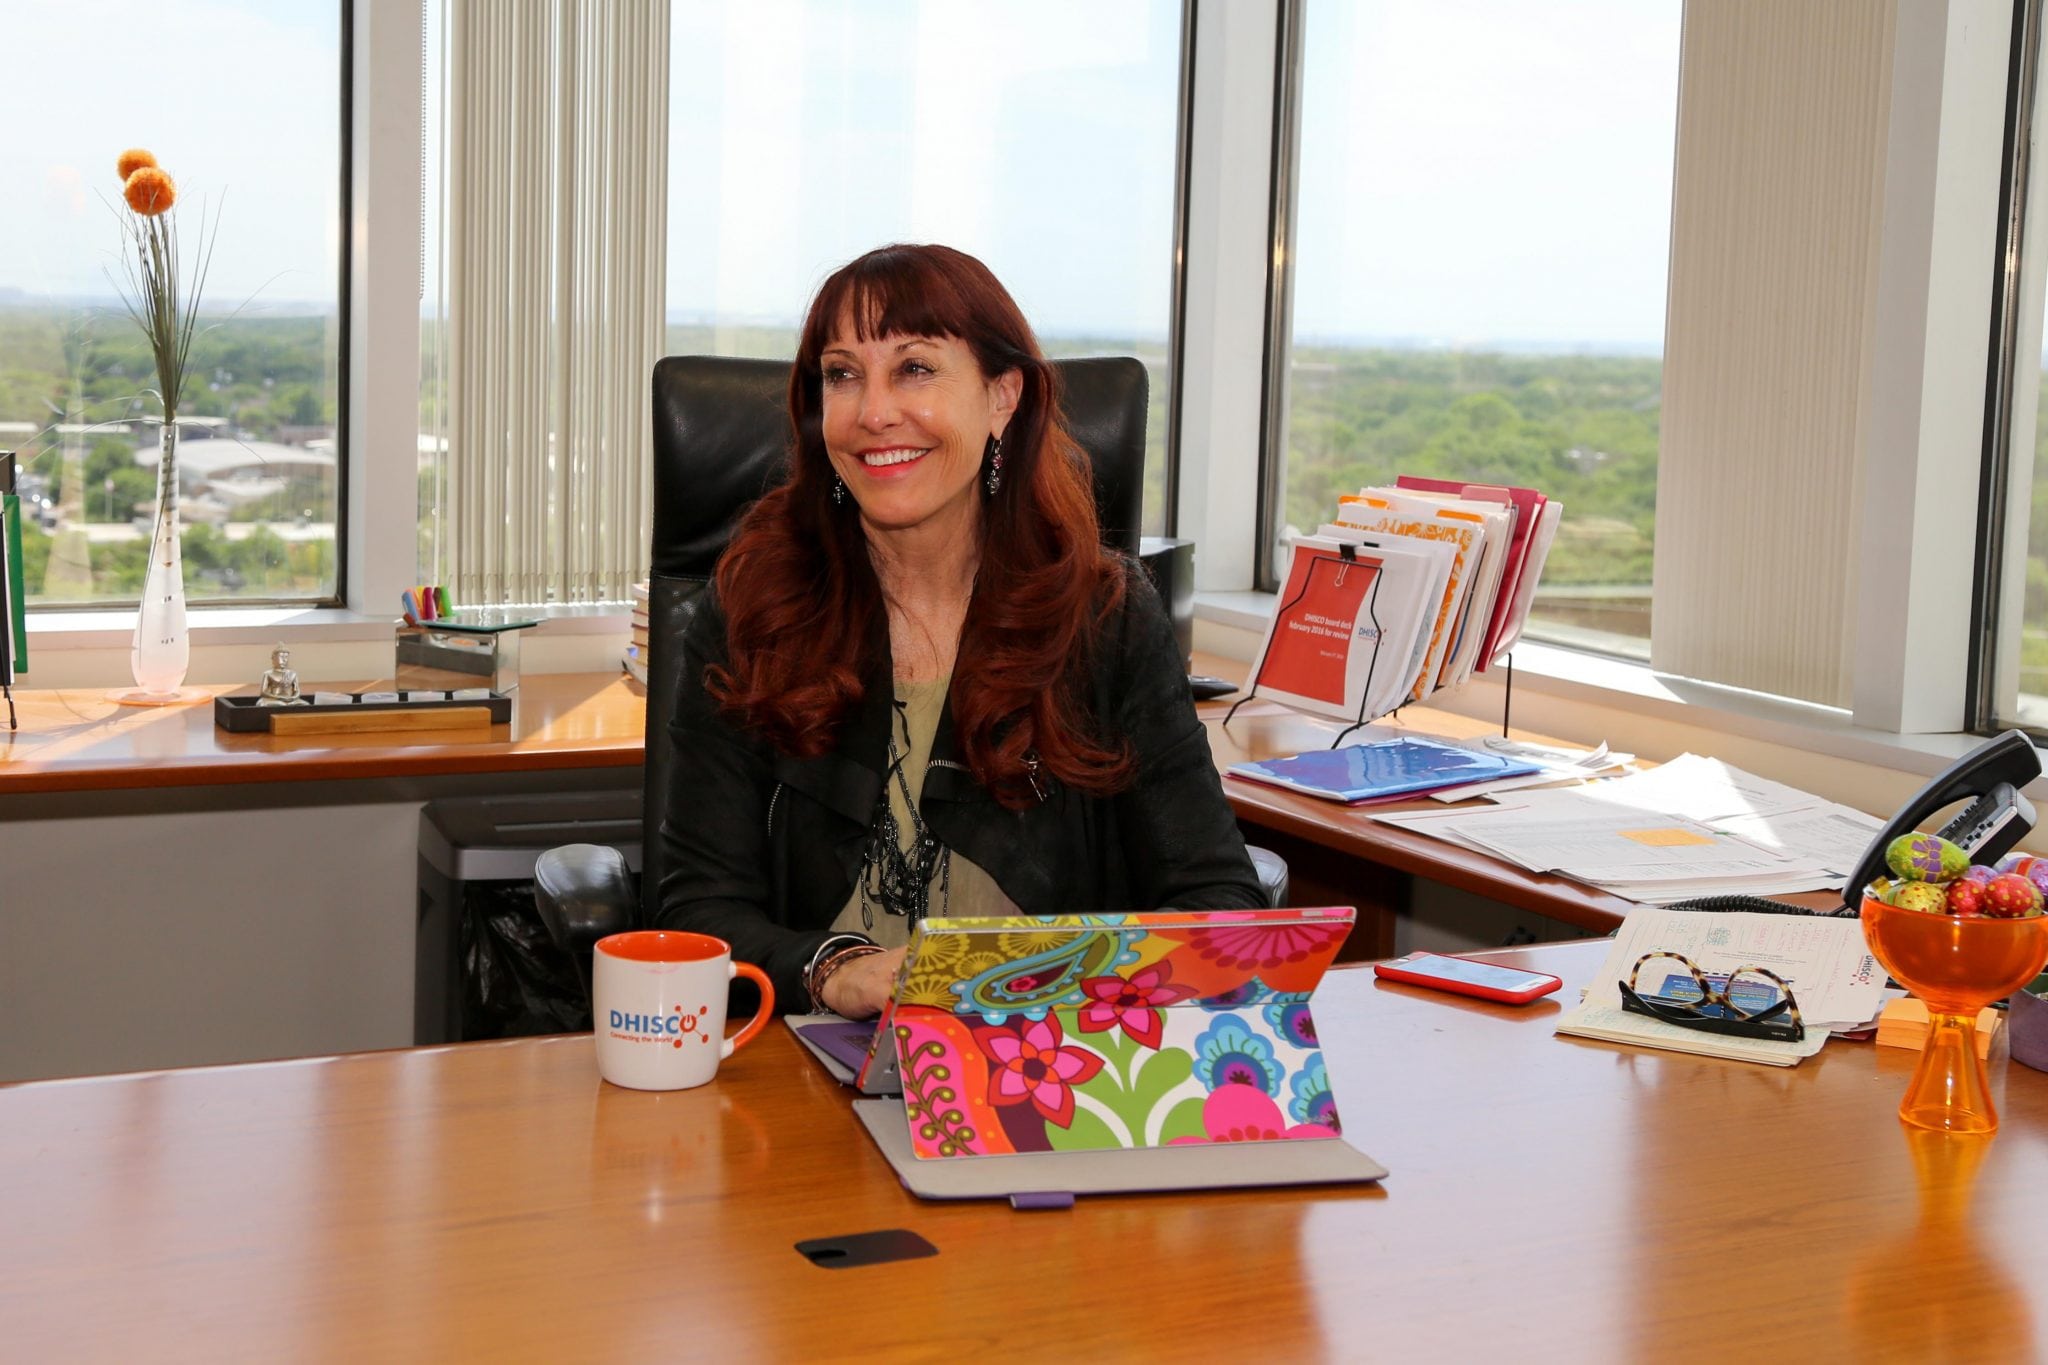 Toni Portmann, shown here at the Dallas headquarters of travel technology company DHISCO, was hired as CEO three years ago to turn around a struggling company. Today the business was acquired by RateGain.